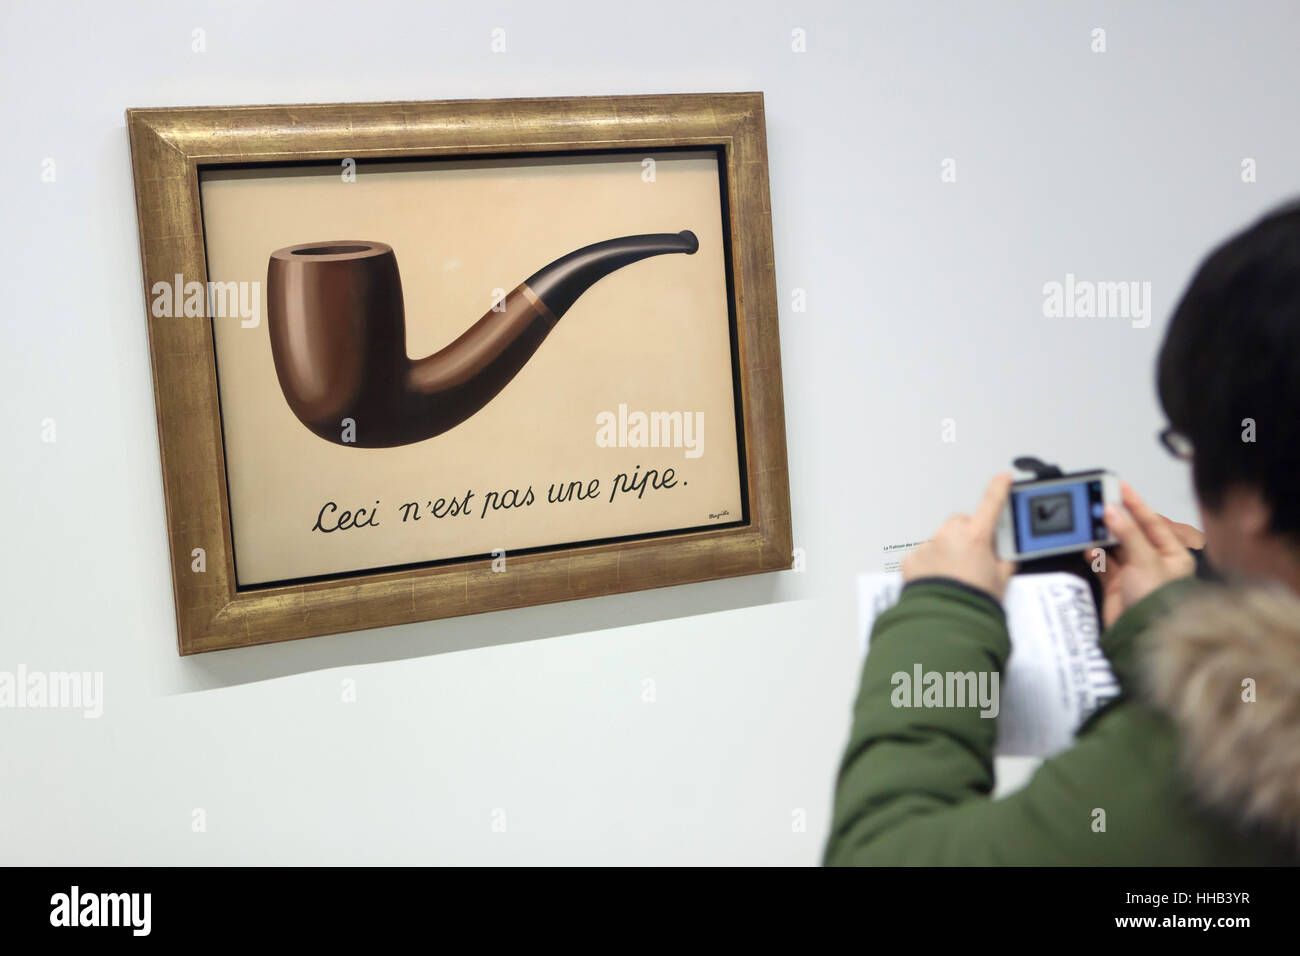 Visitor uses his smartphone to photograph the painting 'La trahison des images' ('The Treachery of Images') by Belgian surrealist artist Rene Magritte (1929) displayed at his retrospective exhibition in the Centre Pompidou in Paris, France. The French inscription 'Ceci n'est pas une pipe' means 'This is not a pipe'. The exhibition entitled 'Rene Magritte. The Treachery of Images' runs till 23 January 2017. After that the reformulated version of the exhibition will be presented at the Schirn Kunsthalle in Frankfurt am Main, Germany, from 10 February to 5 June 2017. Stock Photo